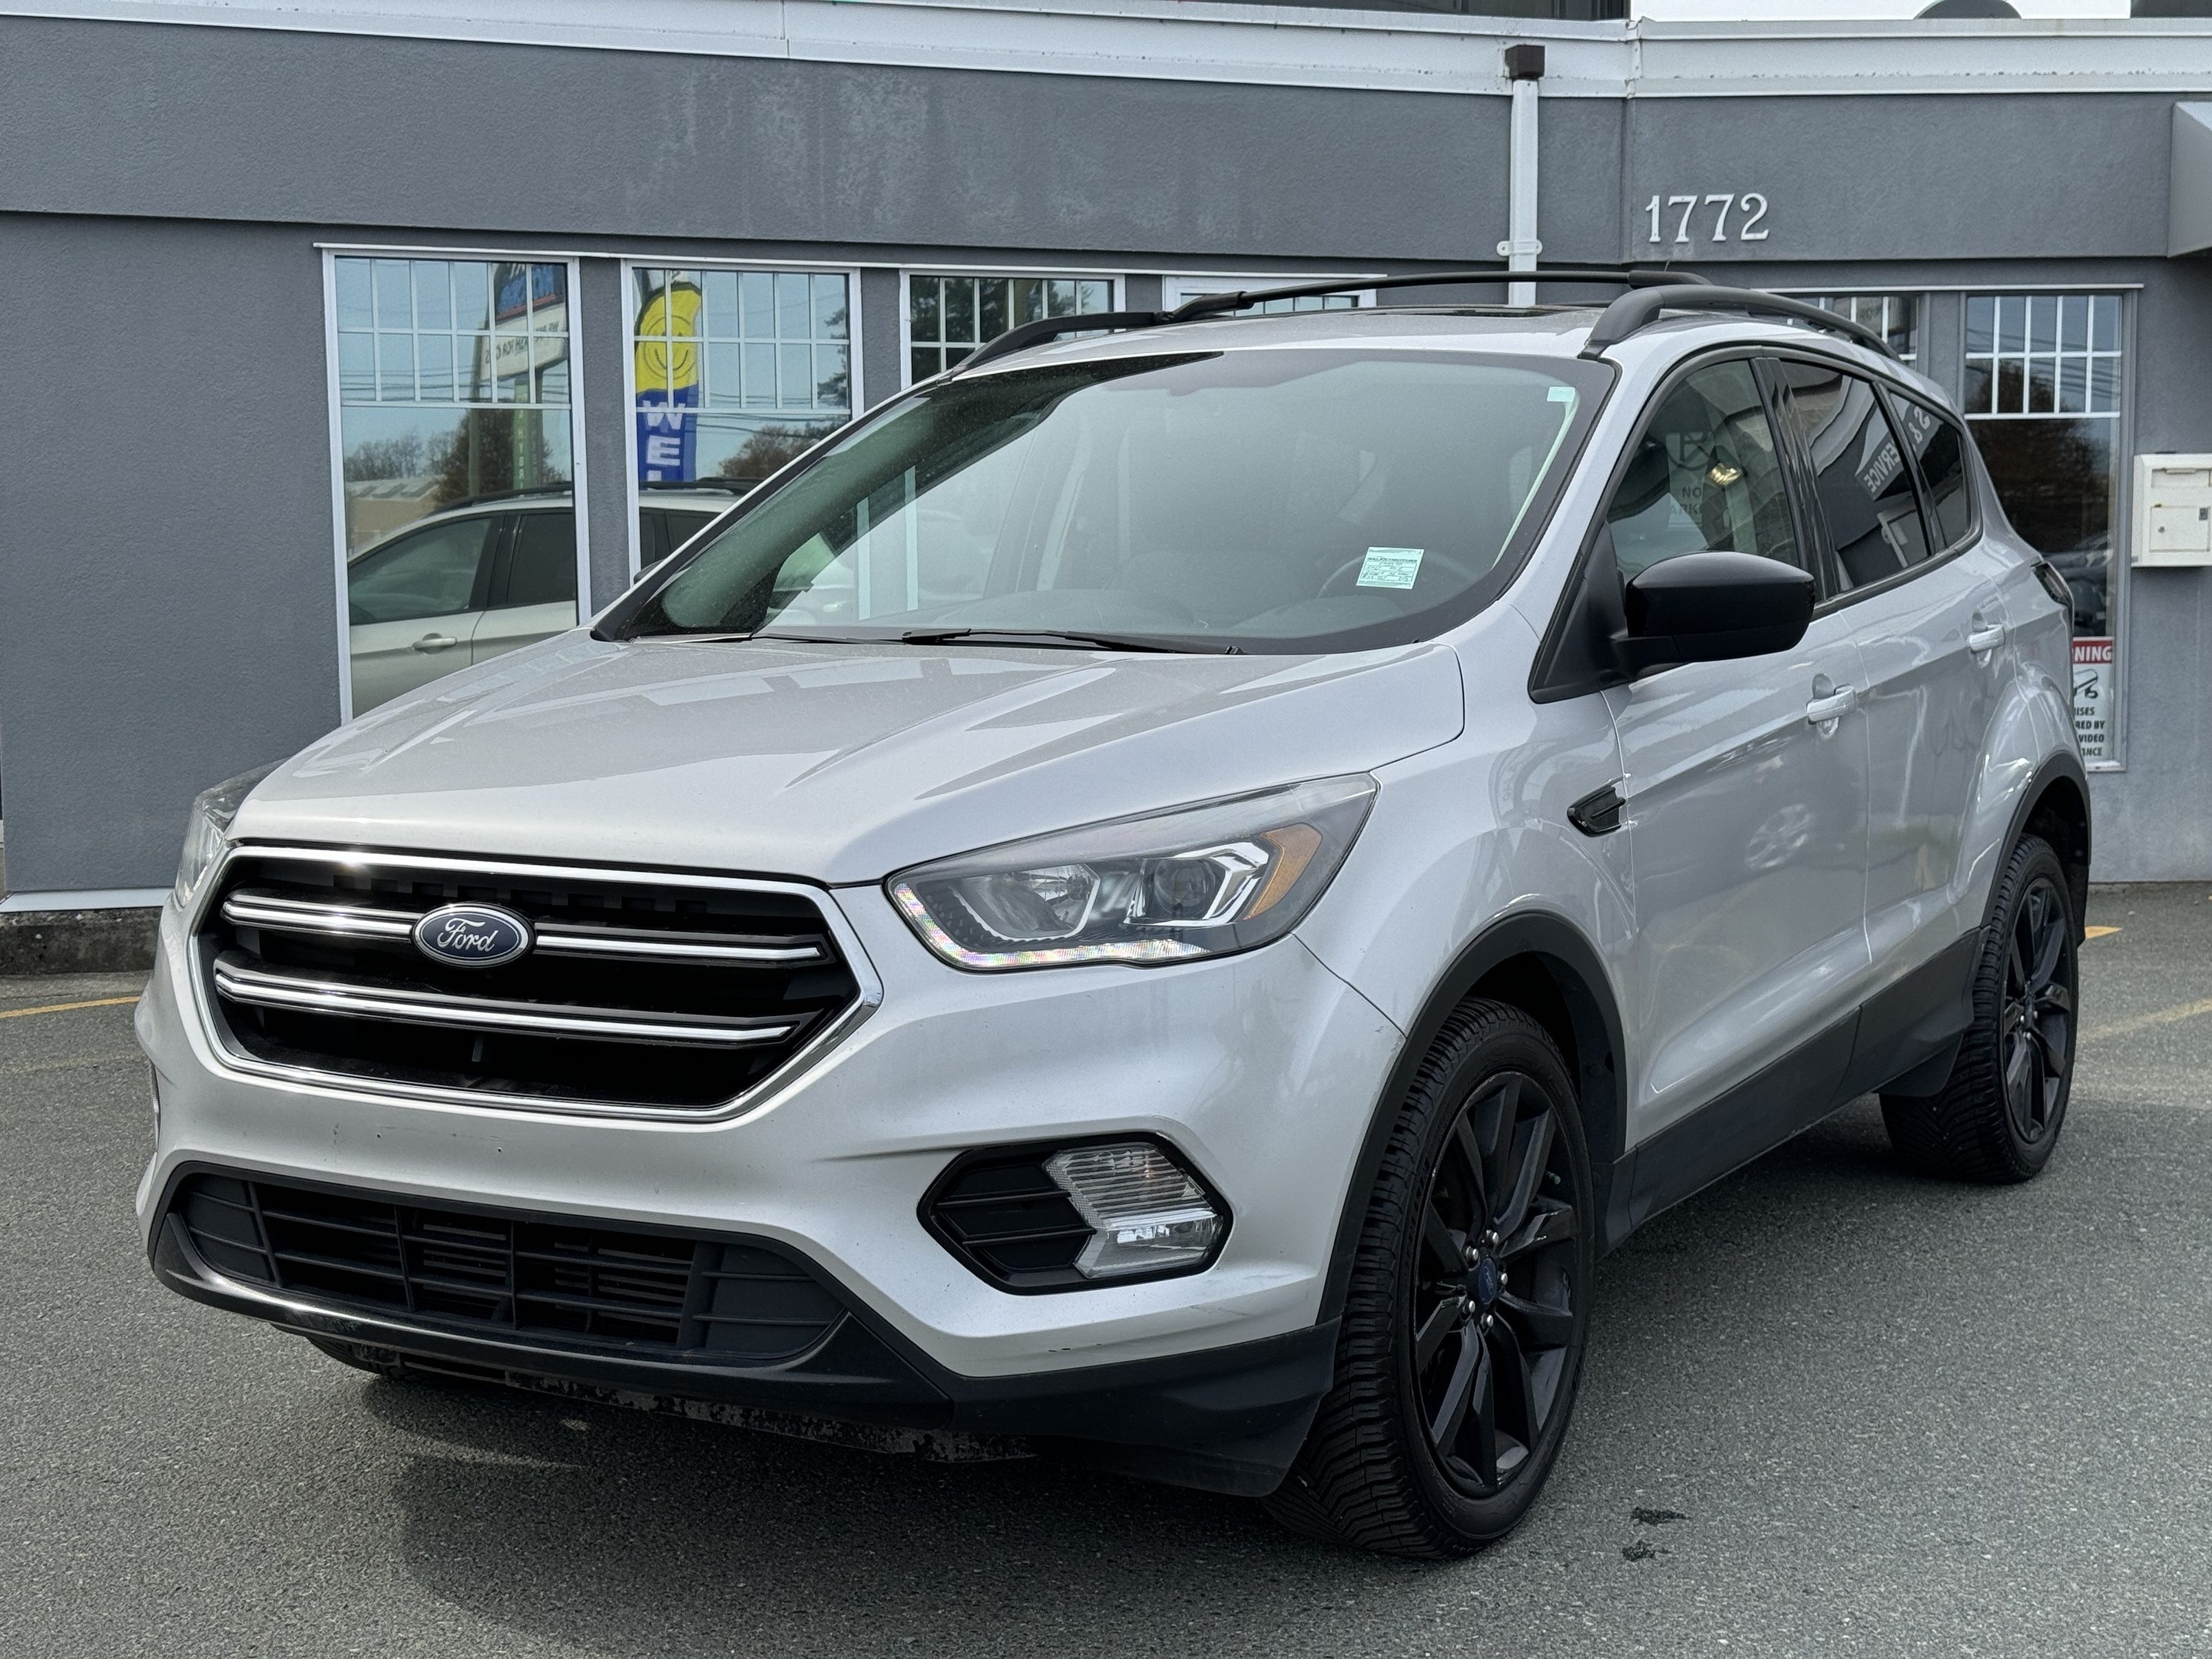 2017 Ford Escape SE 4WD-Auto,Keyless Entry,Heated Seats,SYNC